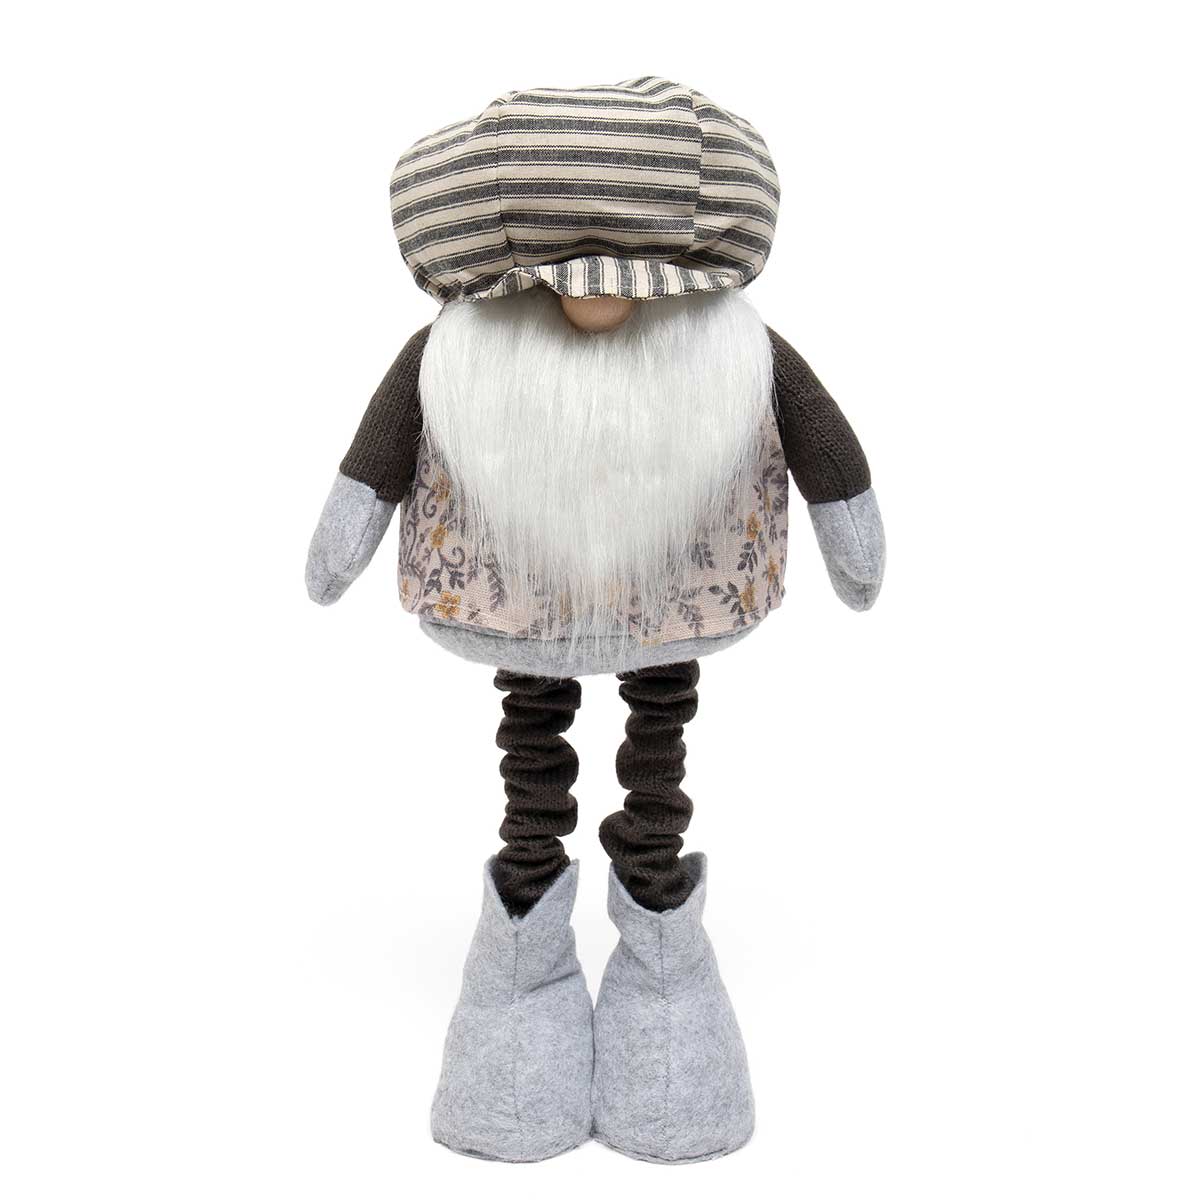 !Mr. Dandy Gnome with Metal Expandable Legs